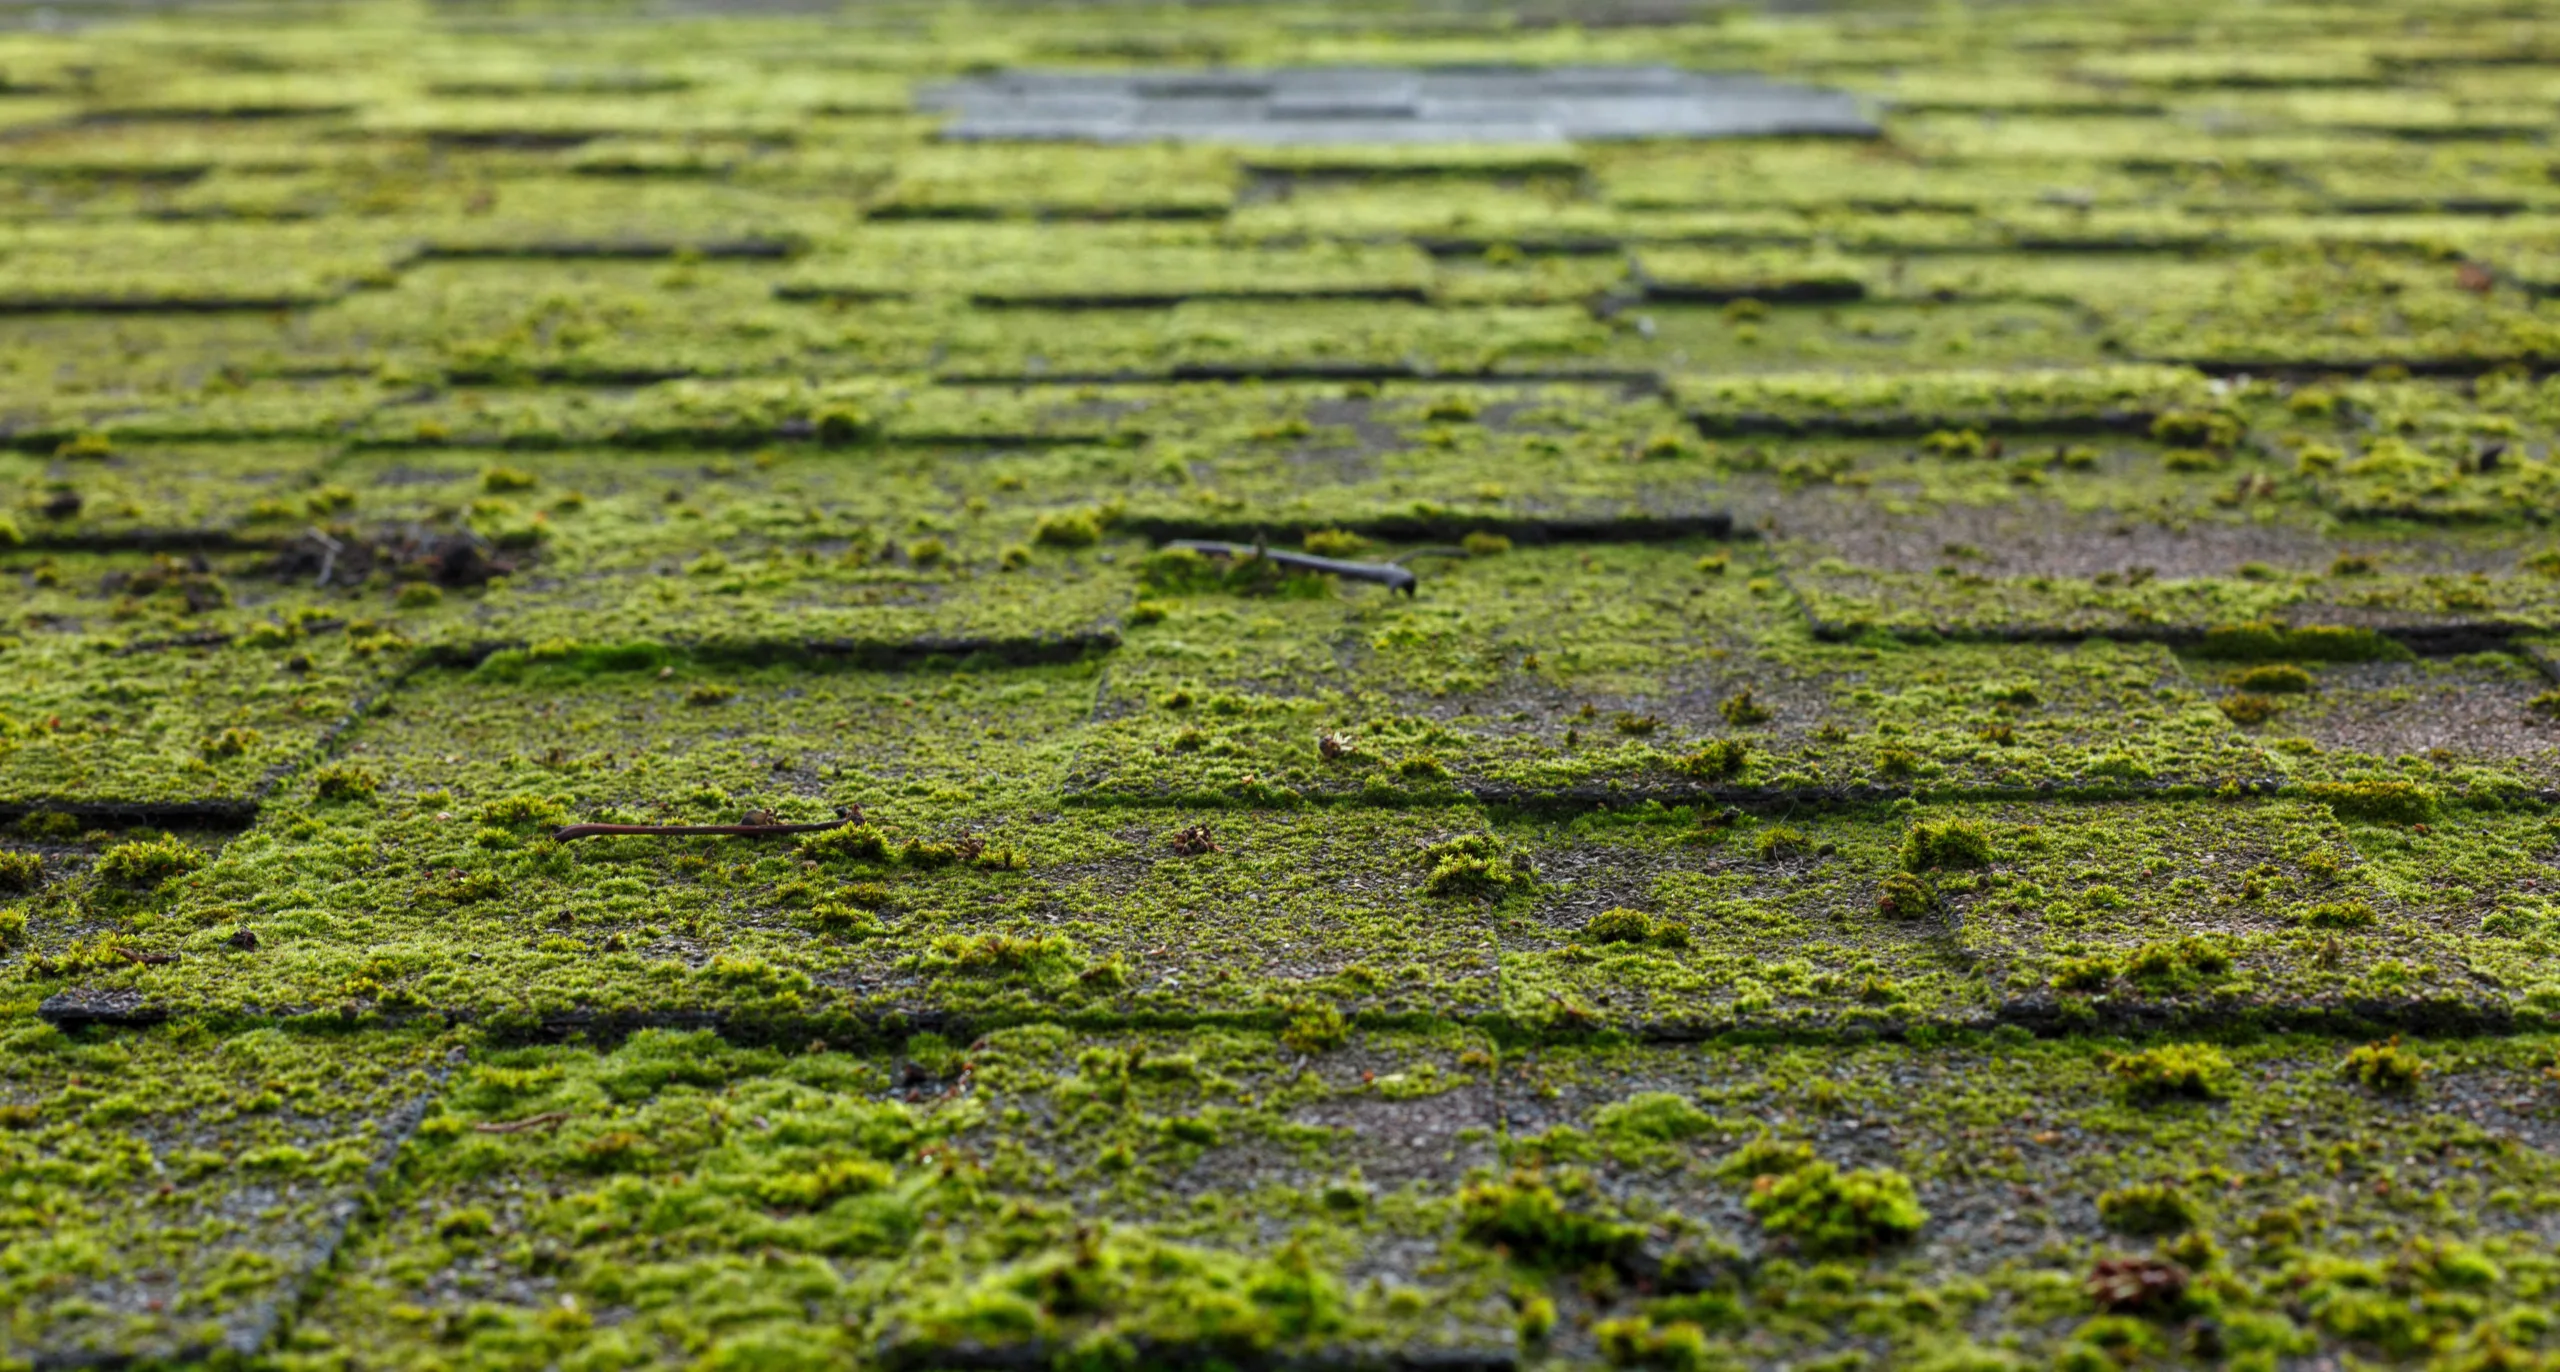 Roof covered with moss